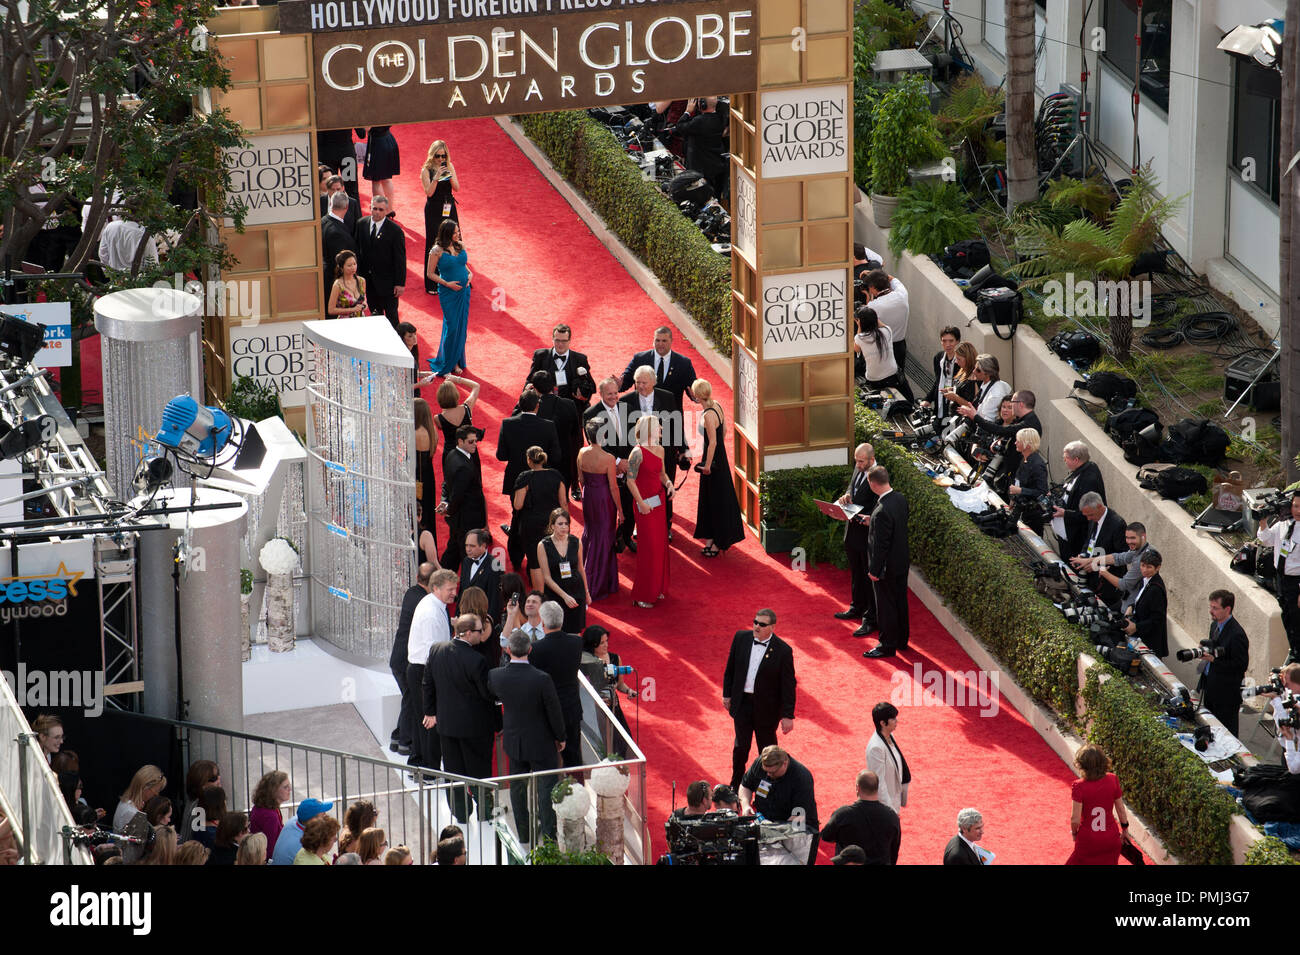 Celebrities arrive at the 68th Annual Golden Globe Awards at the Beverly Hilton in Beverly Hills, CA on Sunday, January 16, 2011.  File Reference # 30825 621  For Editorial Use Only -  All Rights Reserved Stock Photo